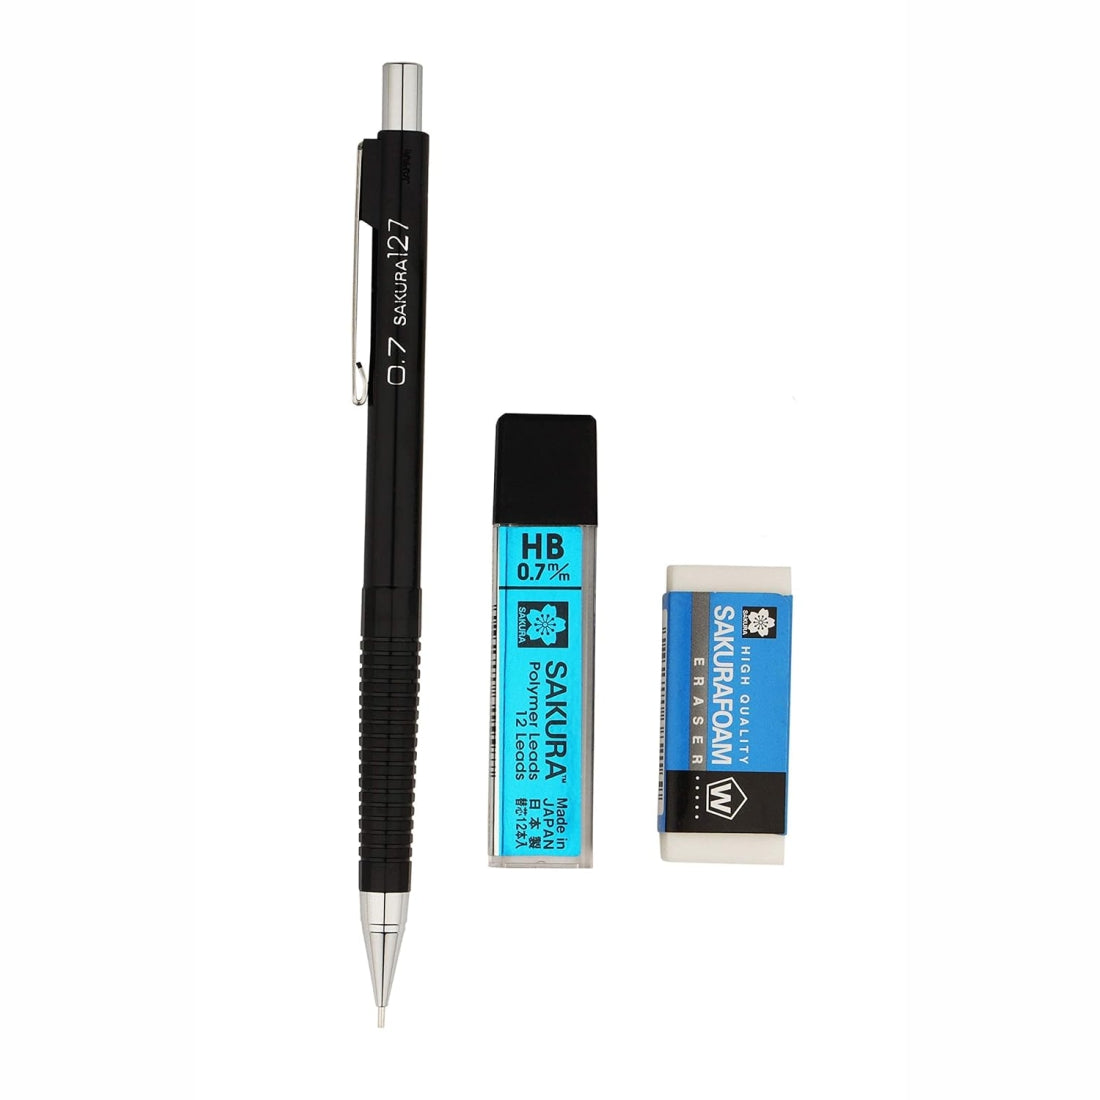 Sakura  Mechanical Pencil with lead and eraser